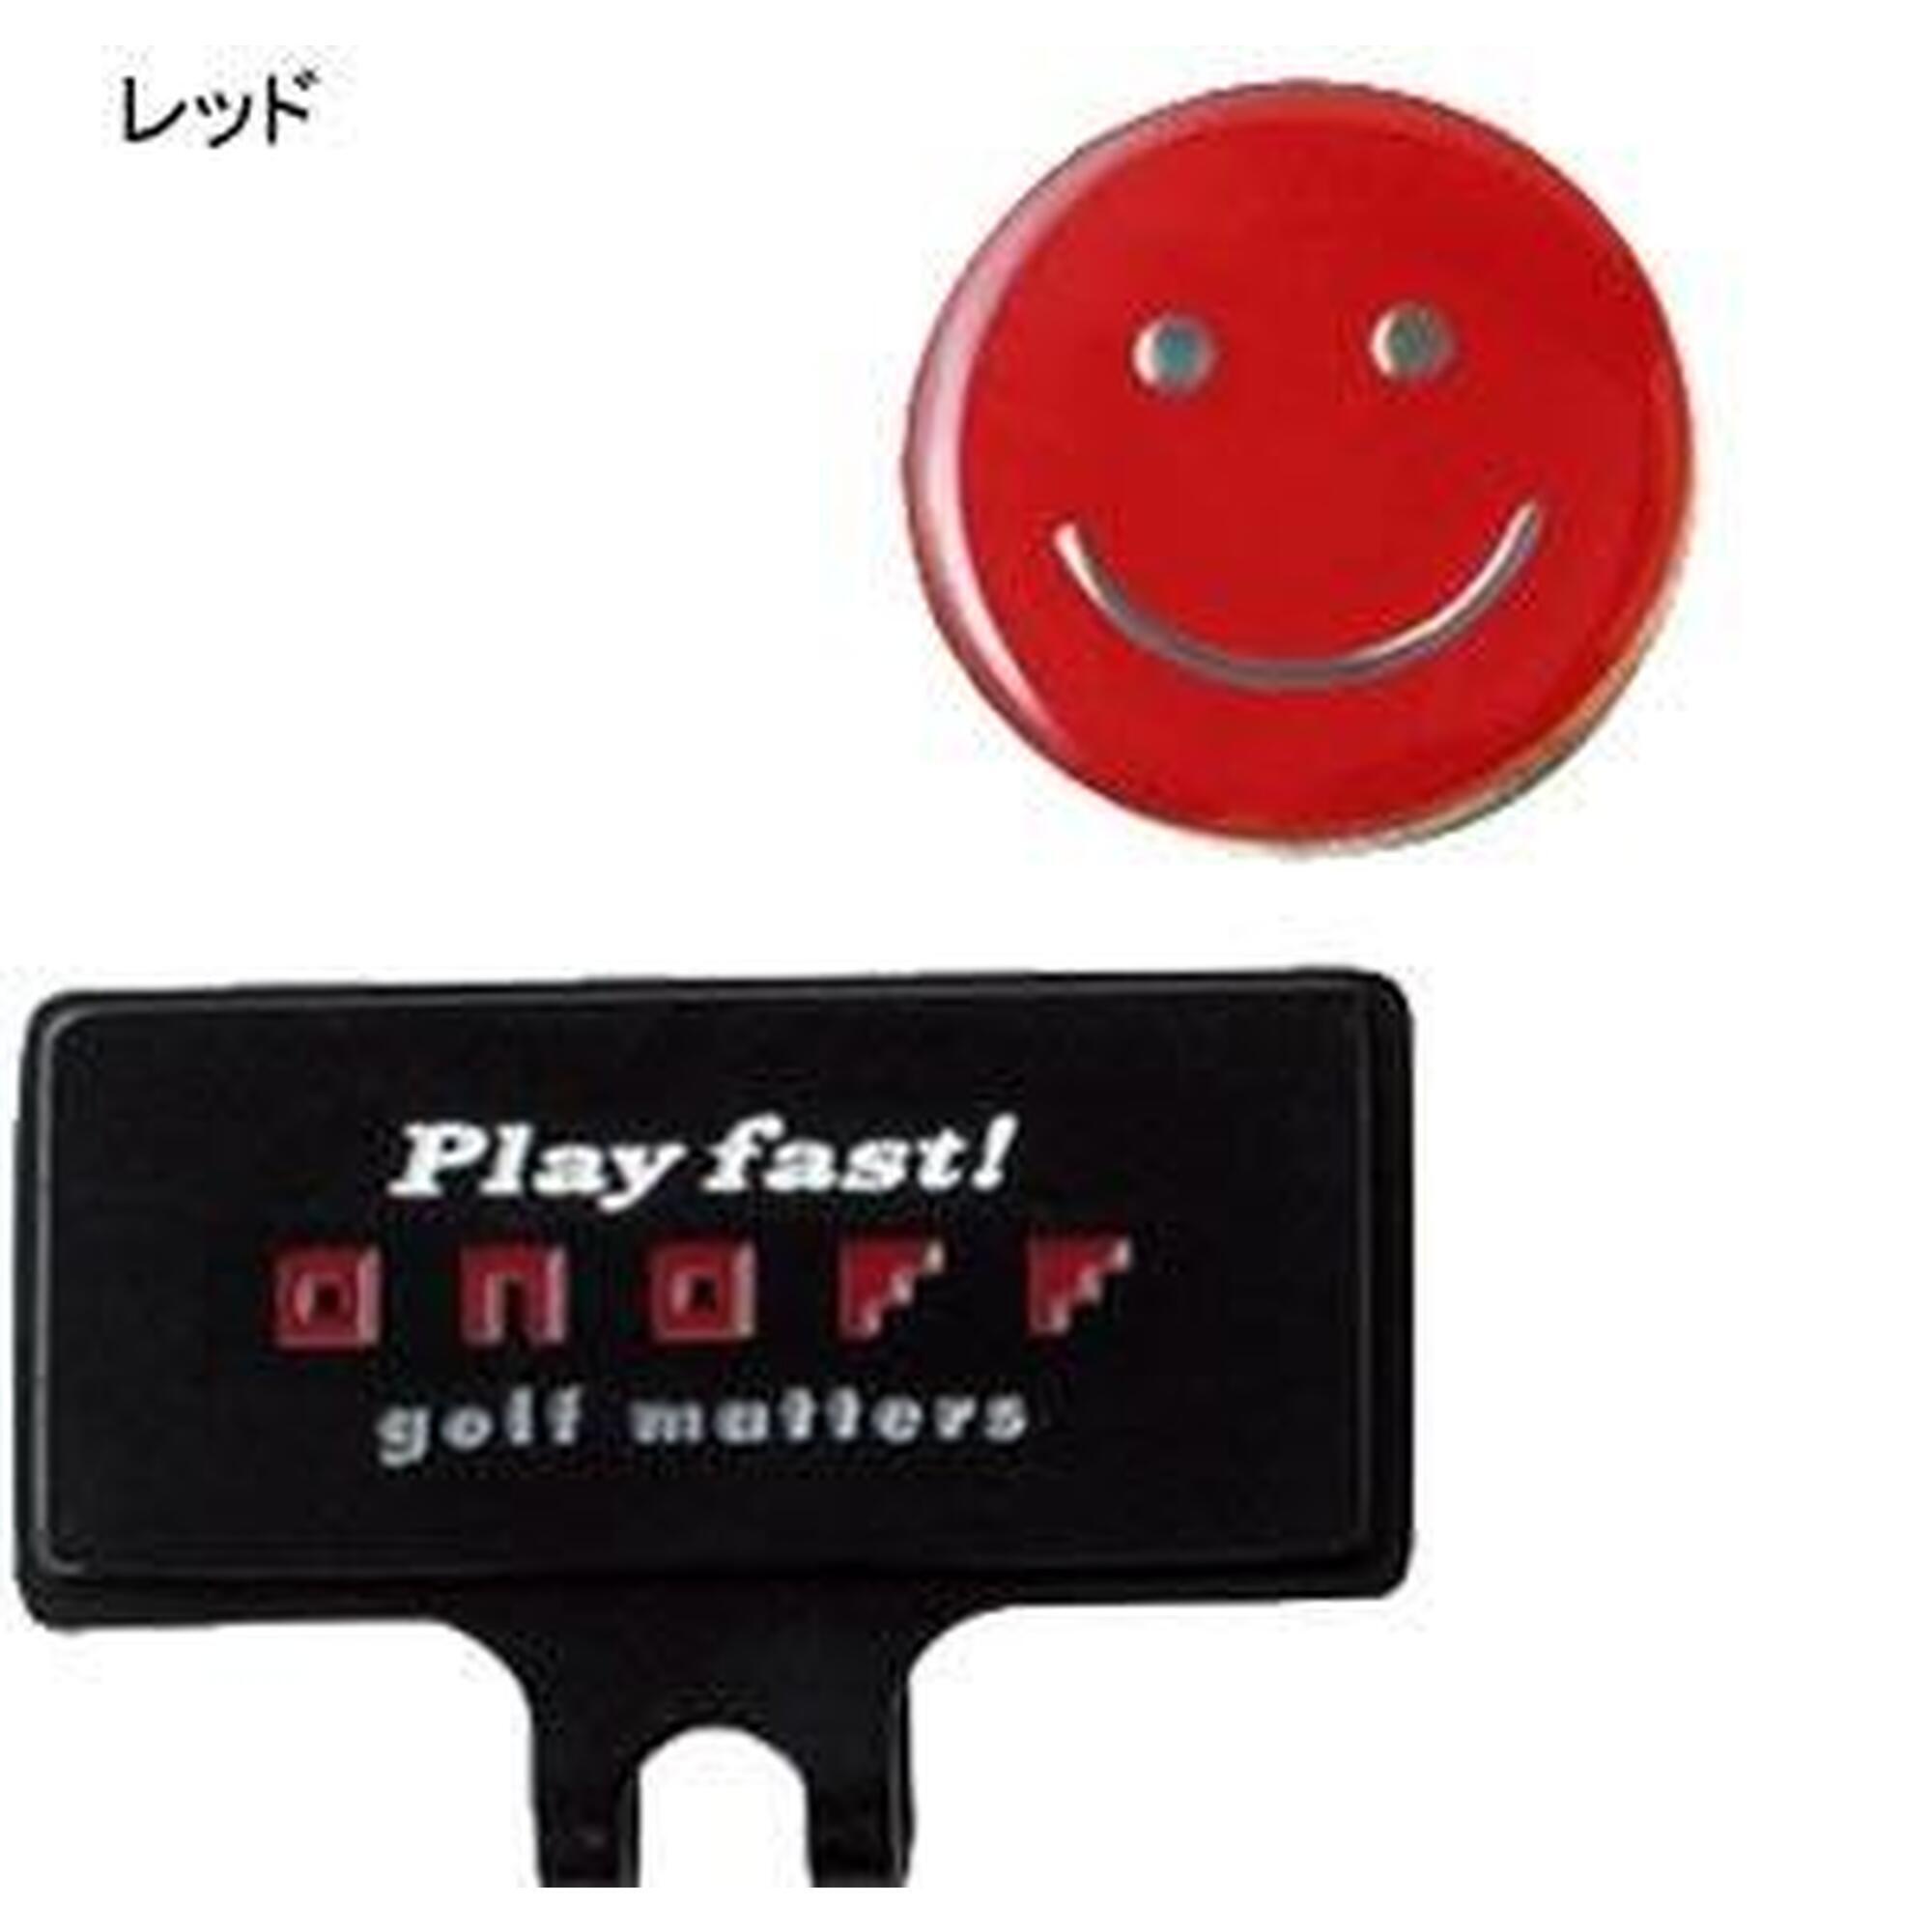 HAPPY FACE GOLF BALL MARKER - RED